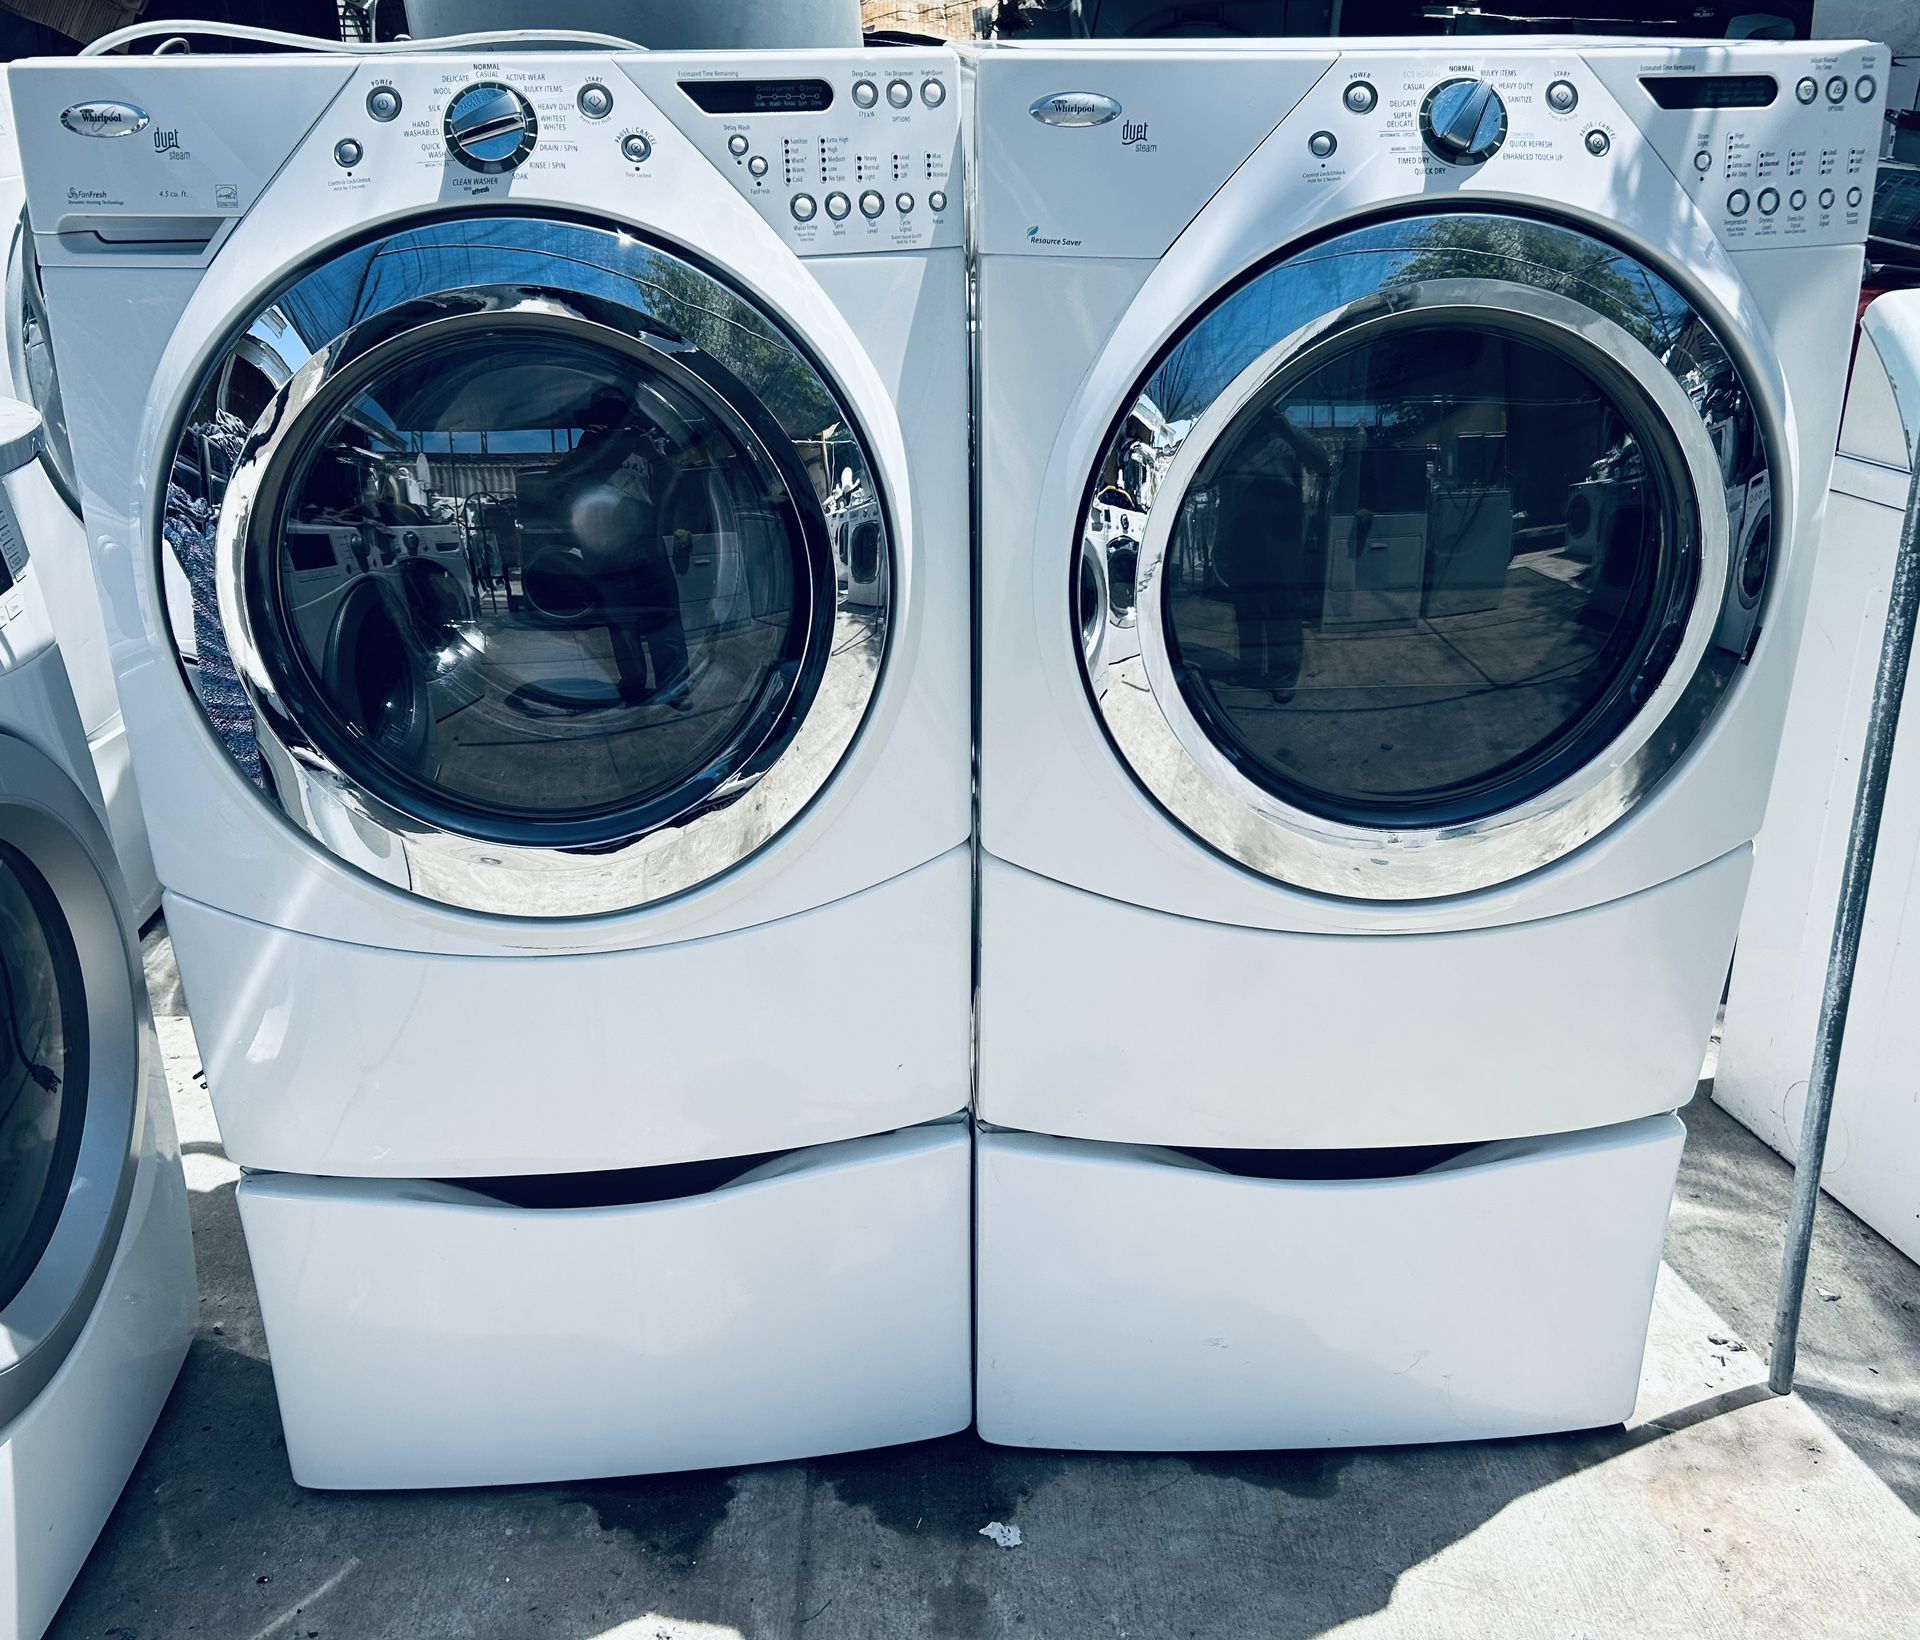 WHIRLPOOL WASHER AND DRYER